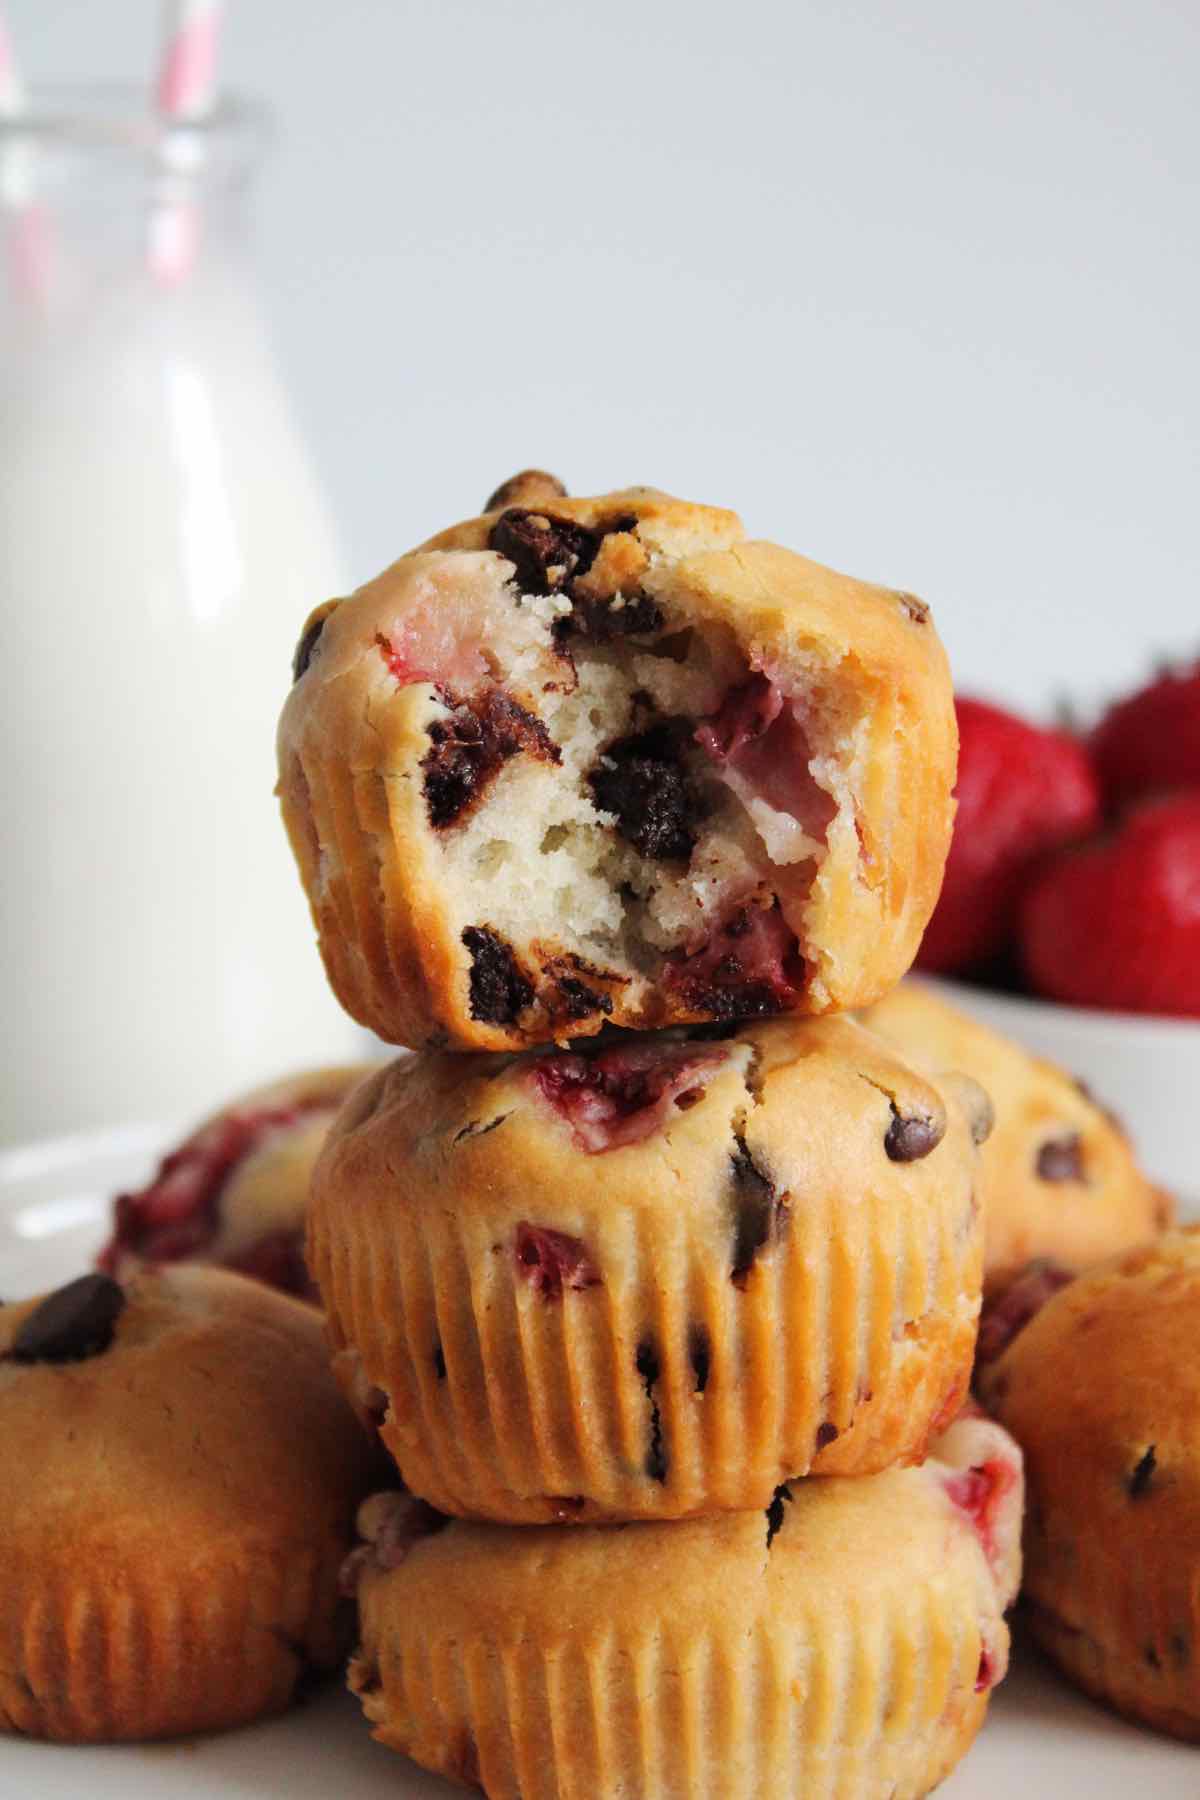 These strawberry chocolate chip muffins are made with fresh strawberries and buttermilk.